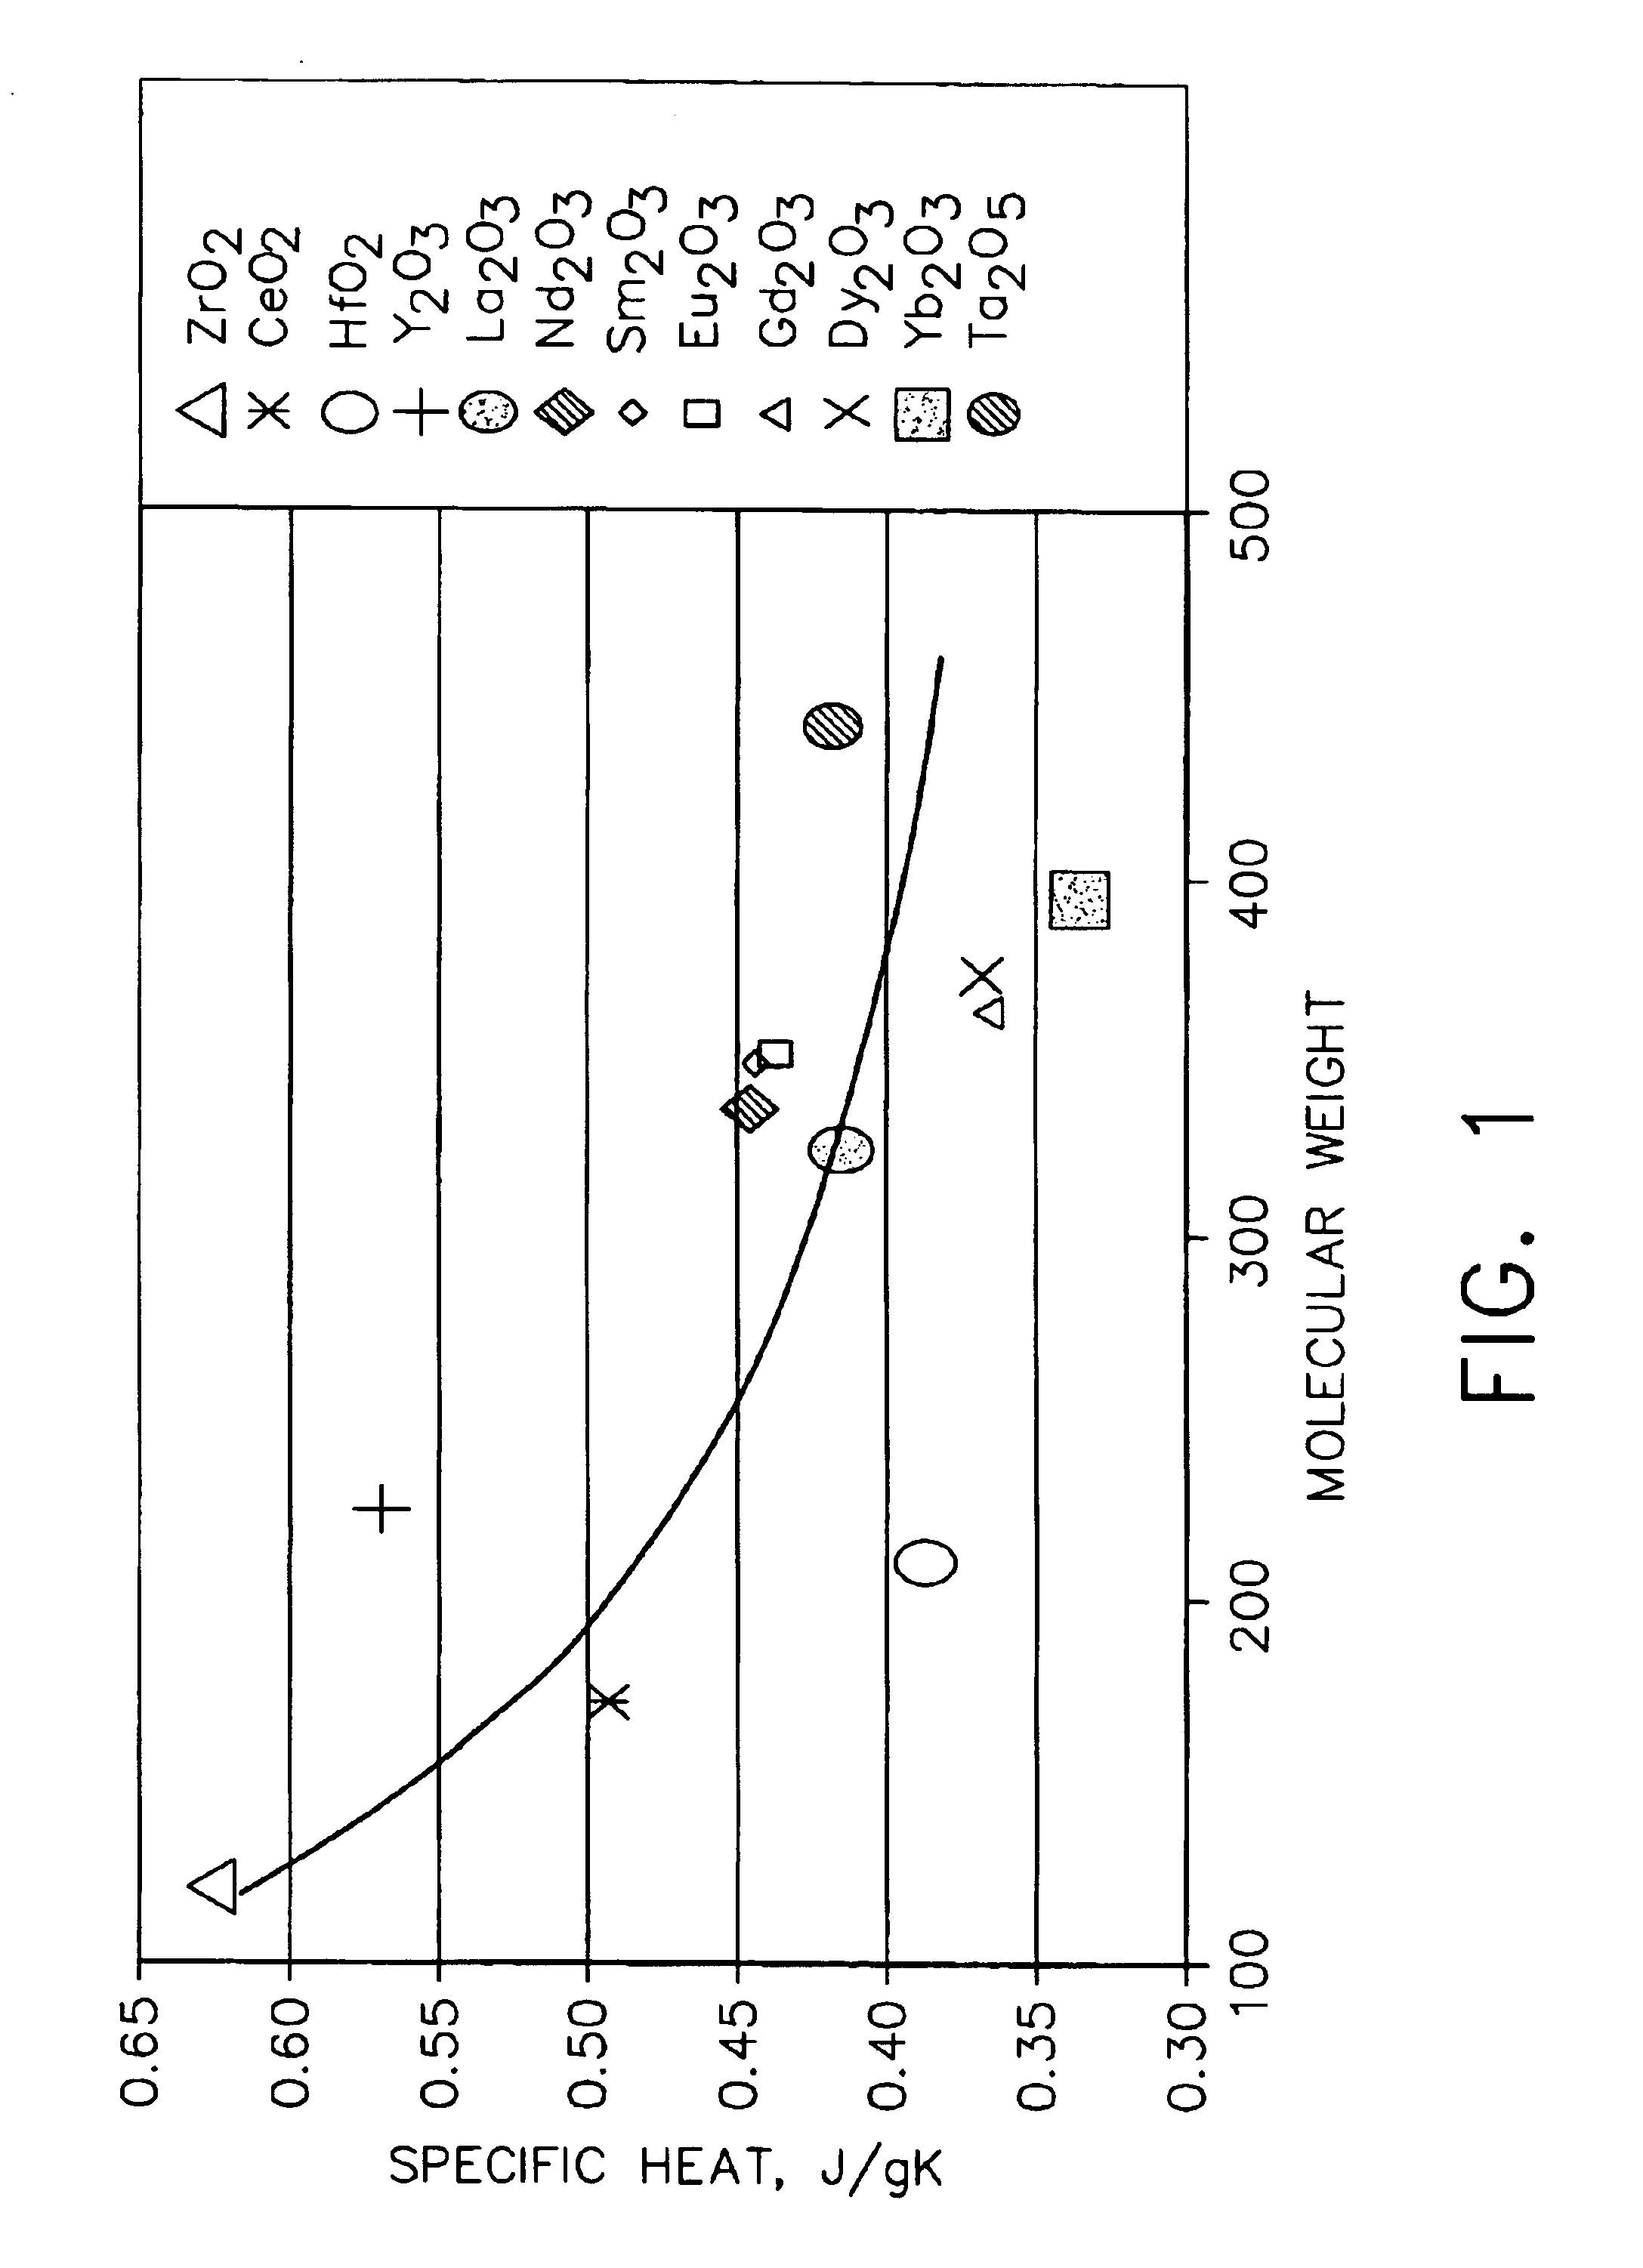 Ceramic compositions for low conductivity thermal barrier coatings